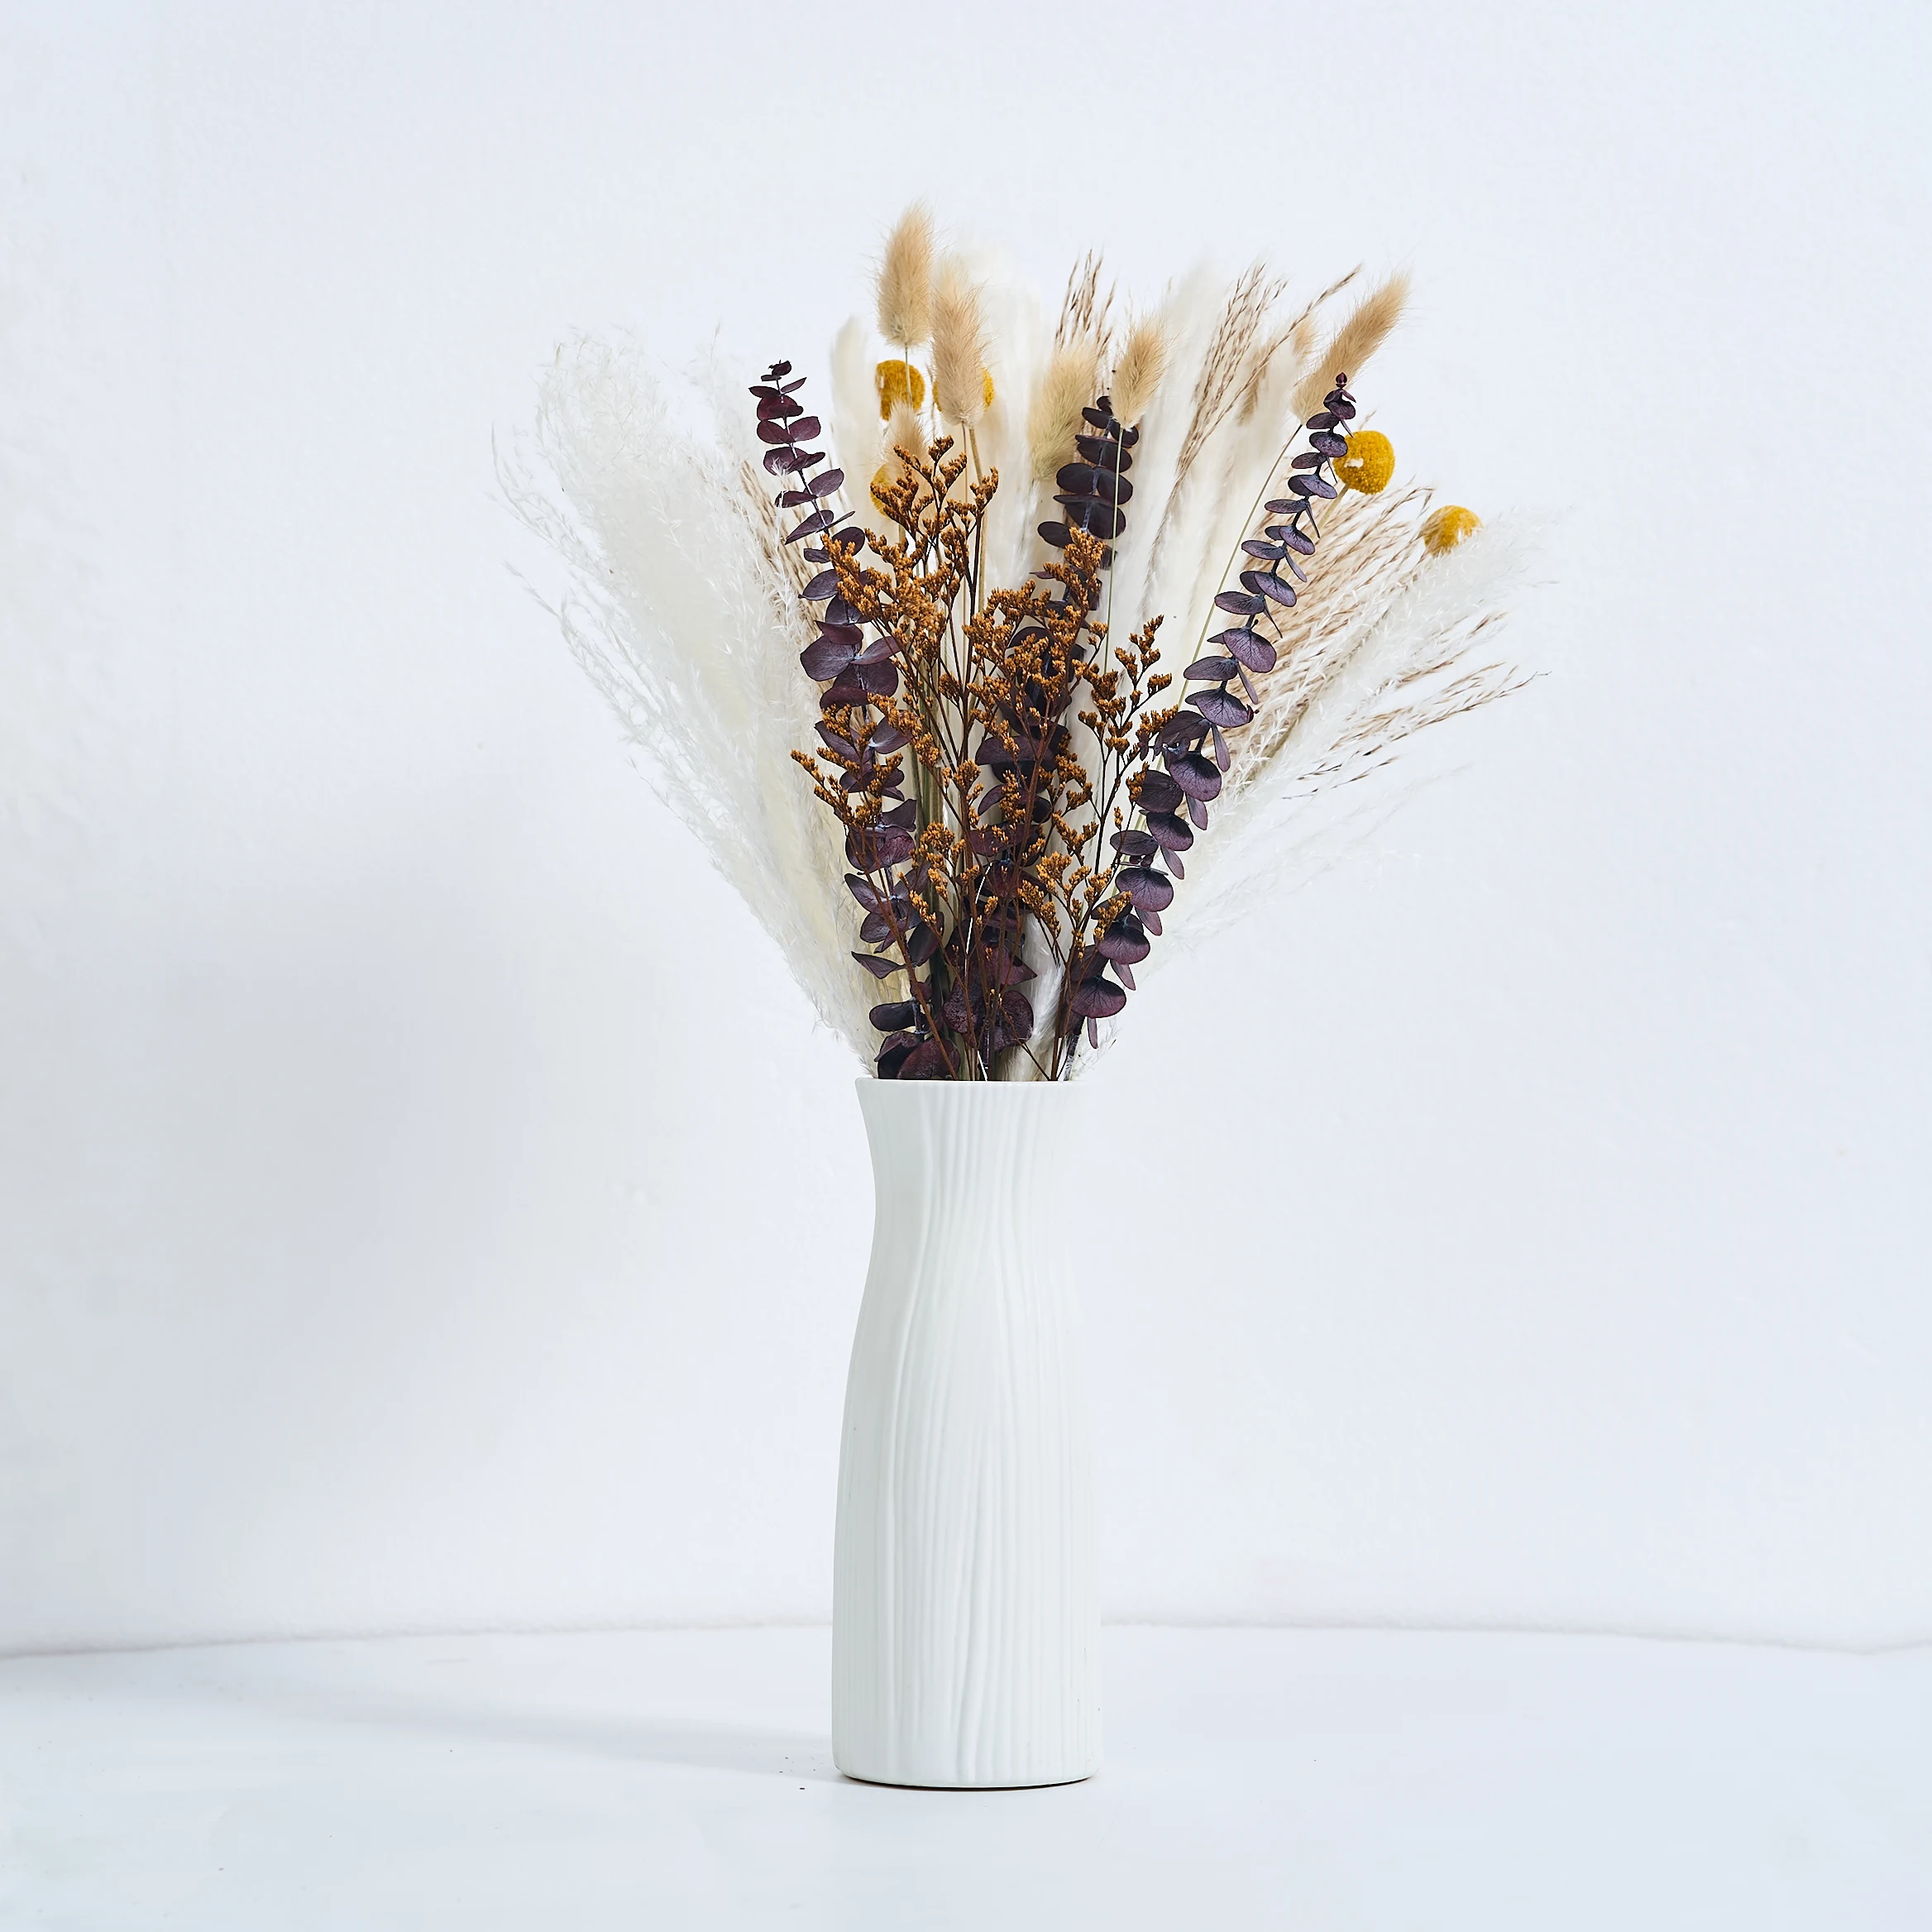 

34pcs Real Natural Dried Flower Bouquet Pampas Reed Small Reed Rabbit Tail Grass Home Decor Mix and Match Dried Flower Bouquet